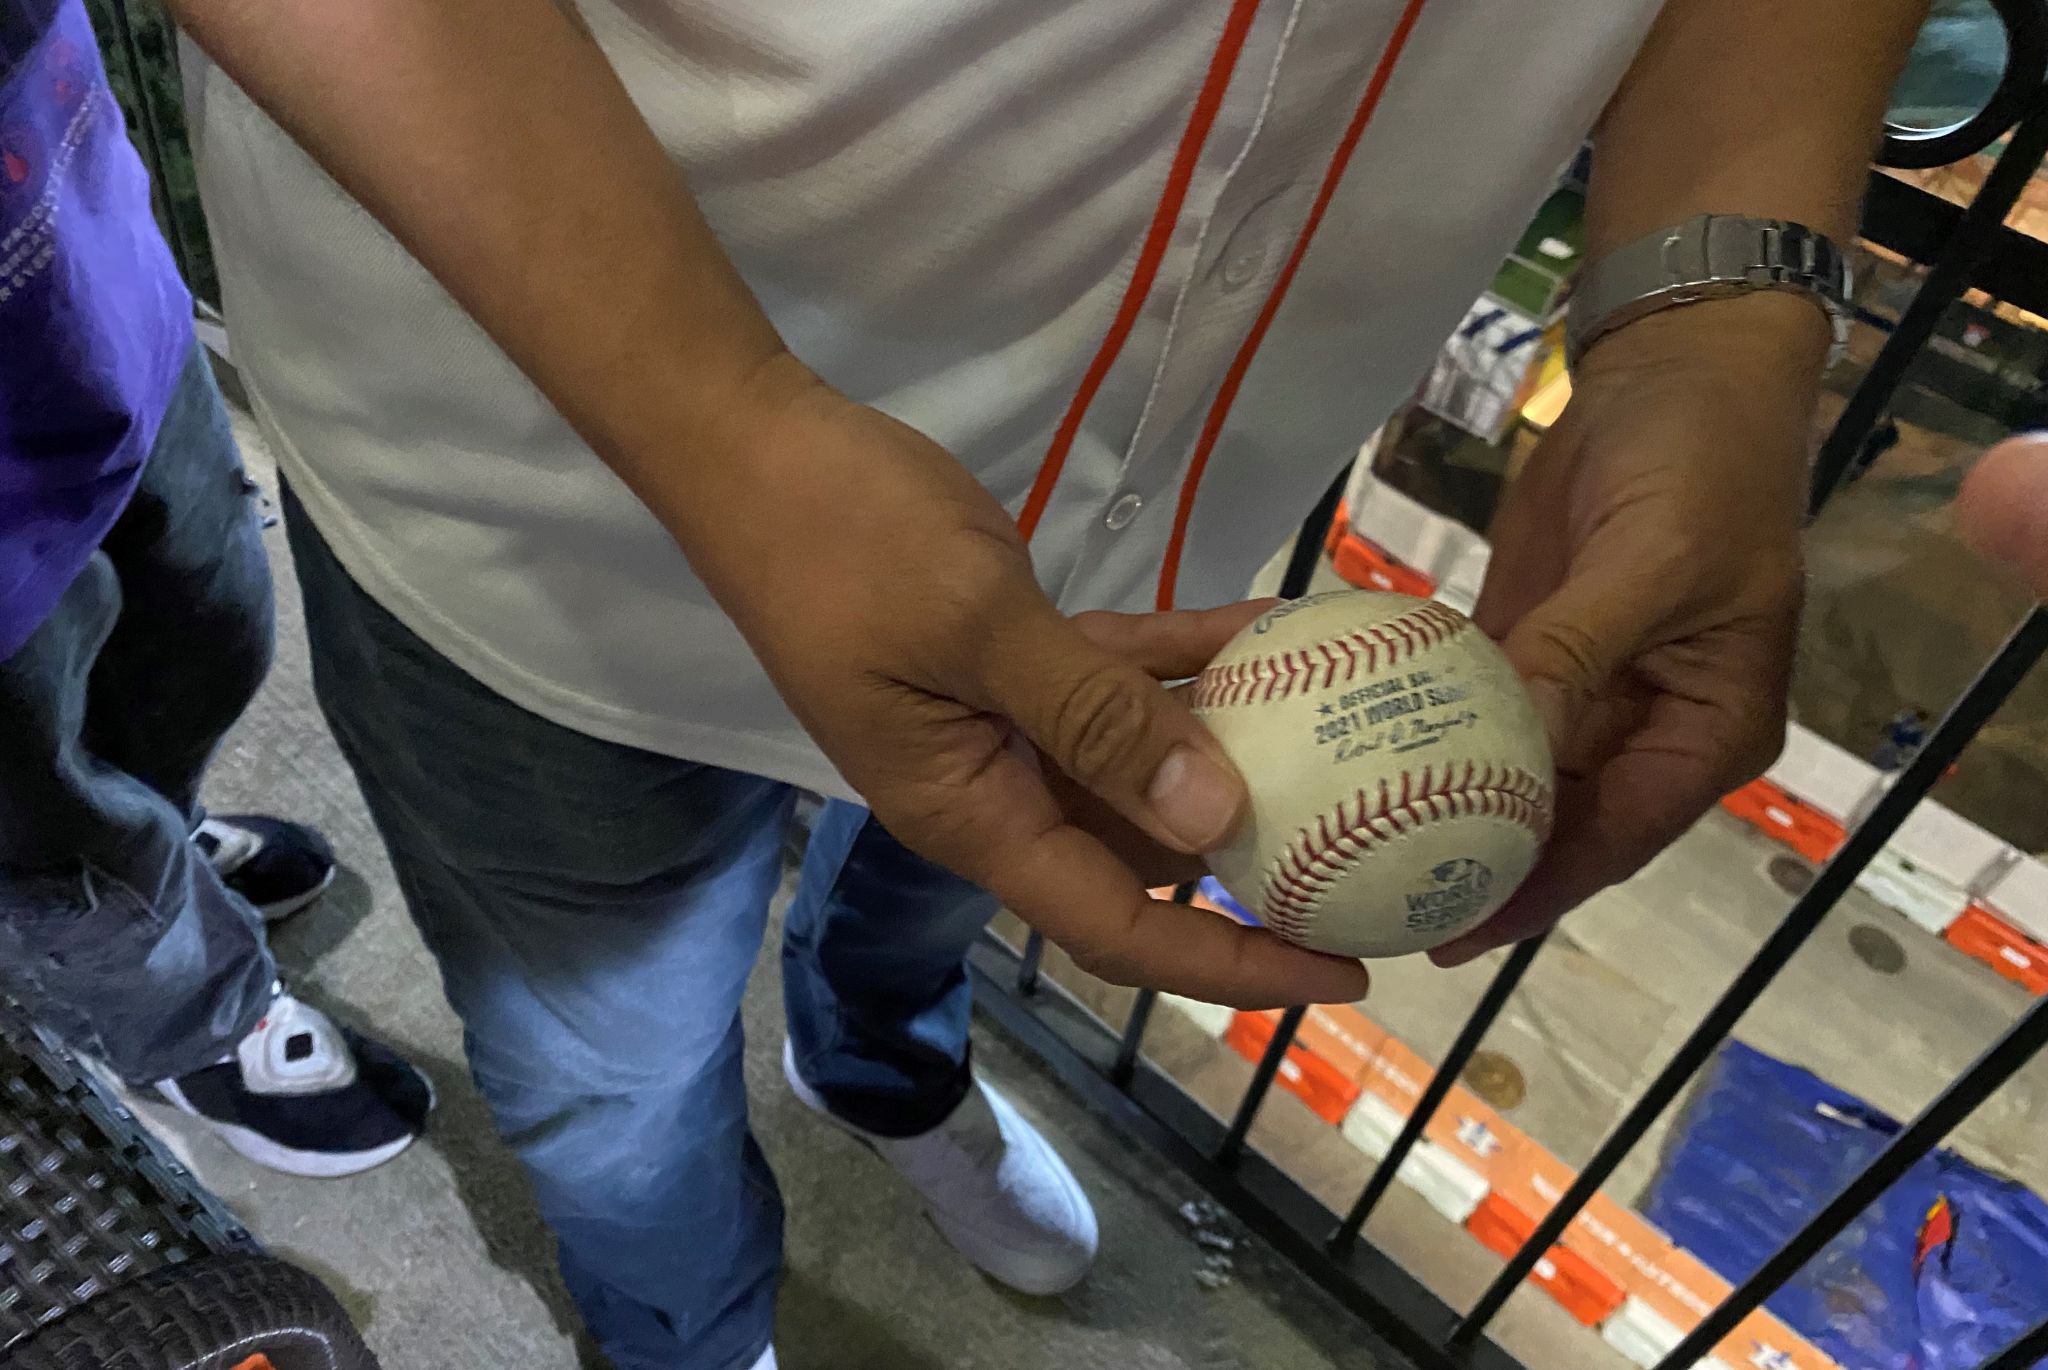 Jorge Solar World Series Game 6 home run ball ended up at local party